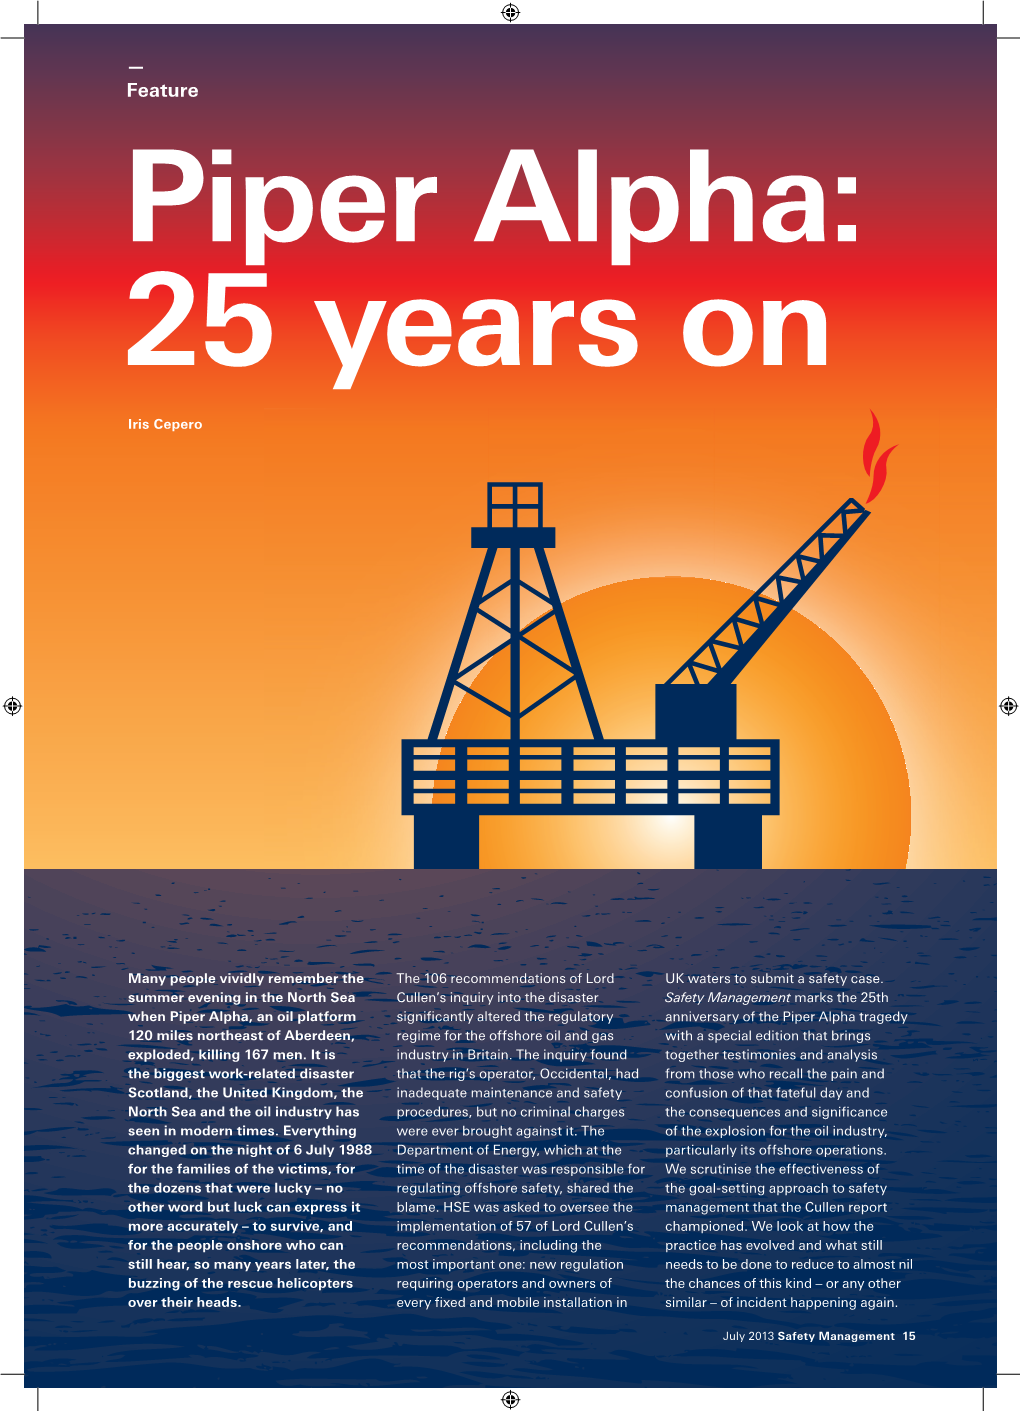 Piper Alpha: 25 Years On